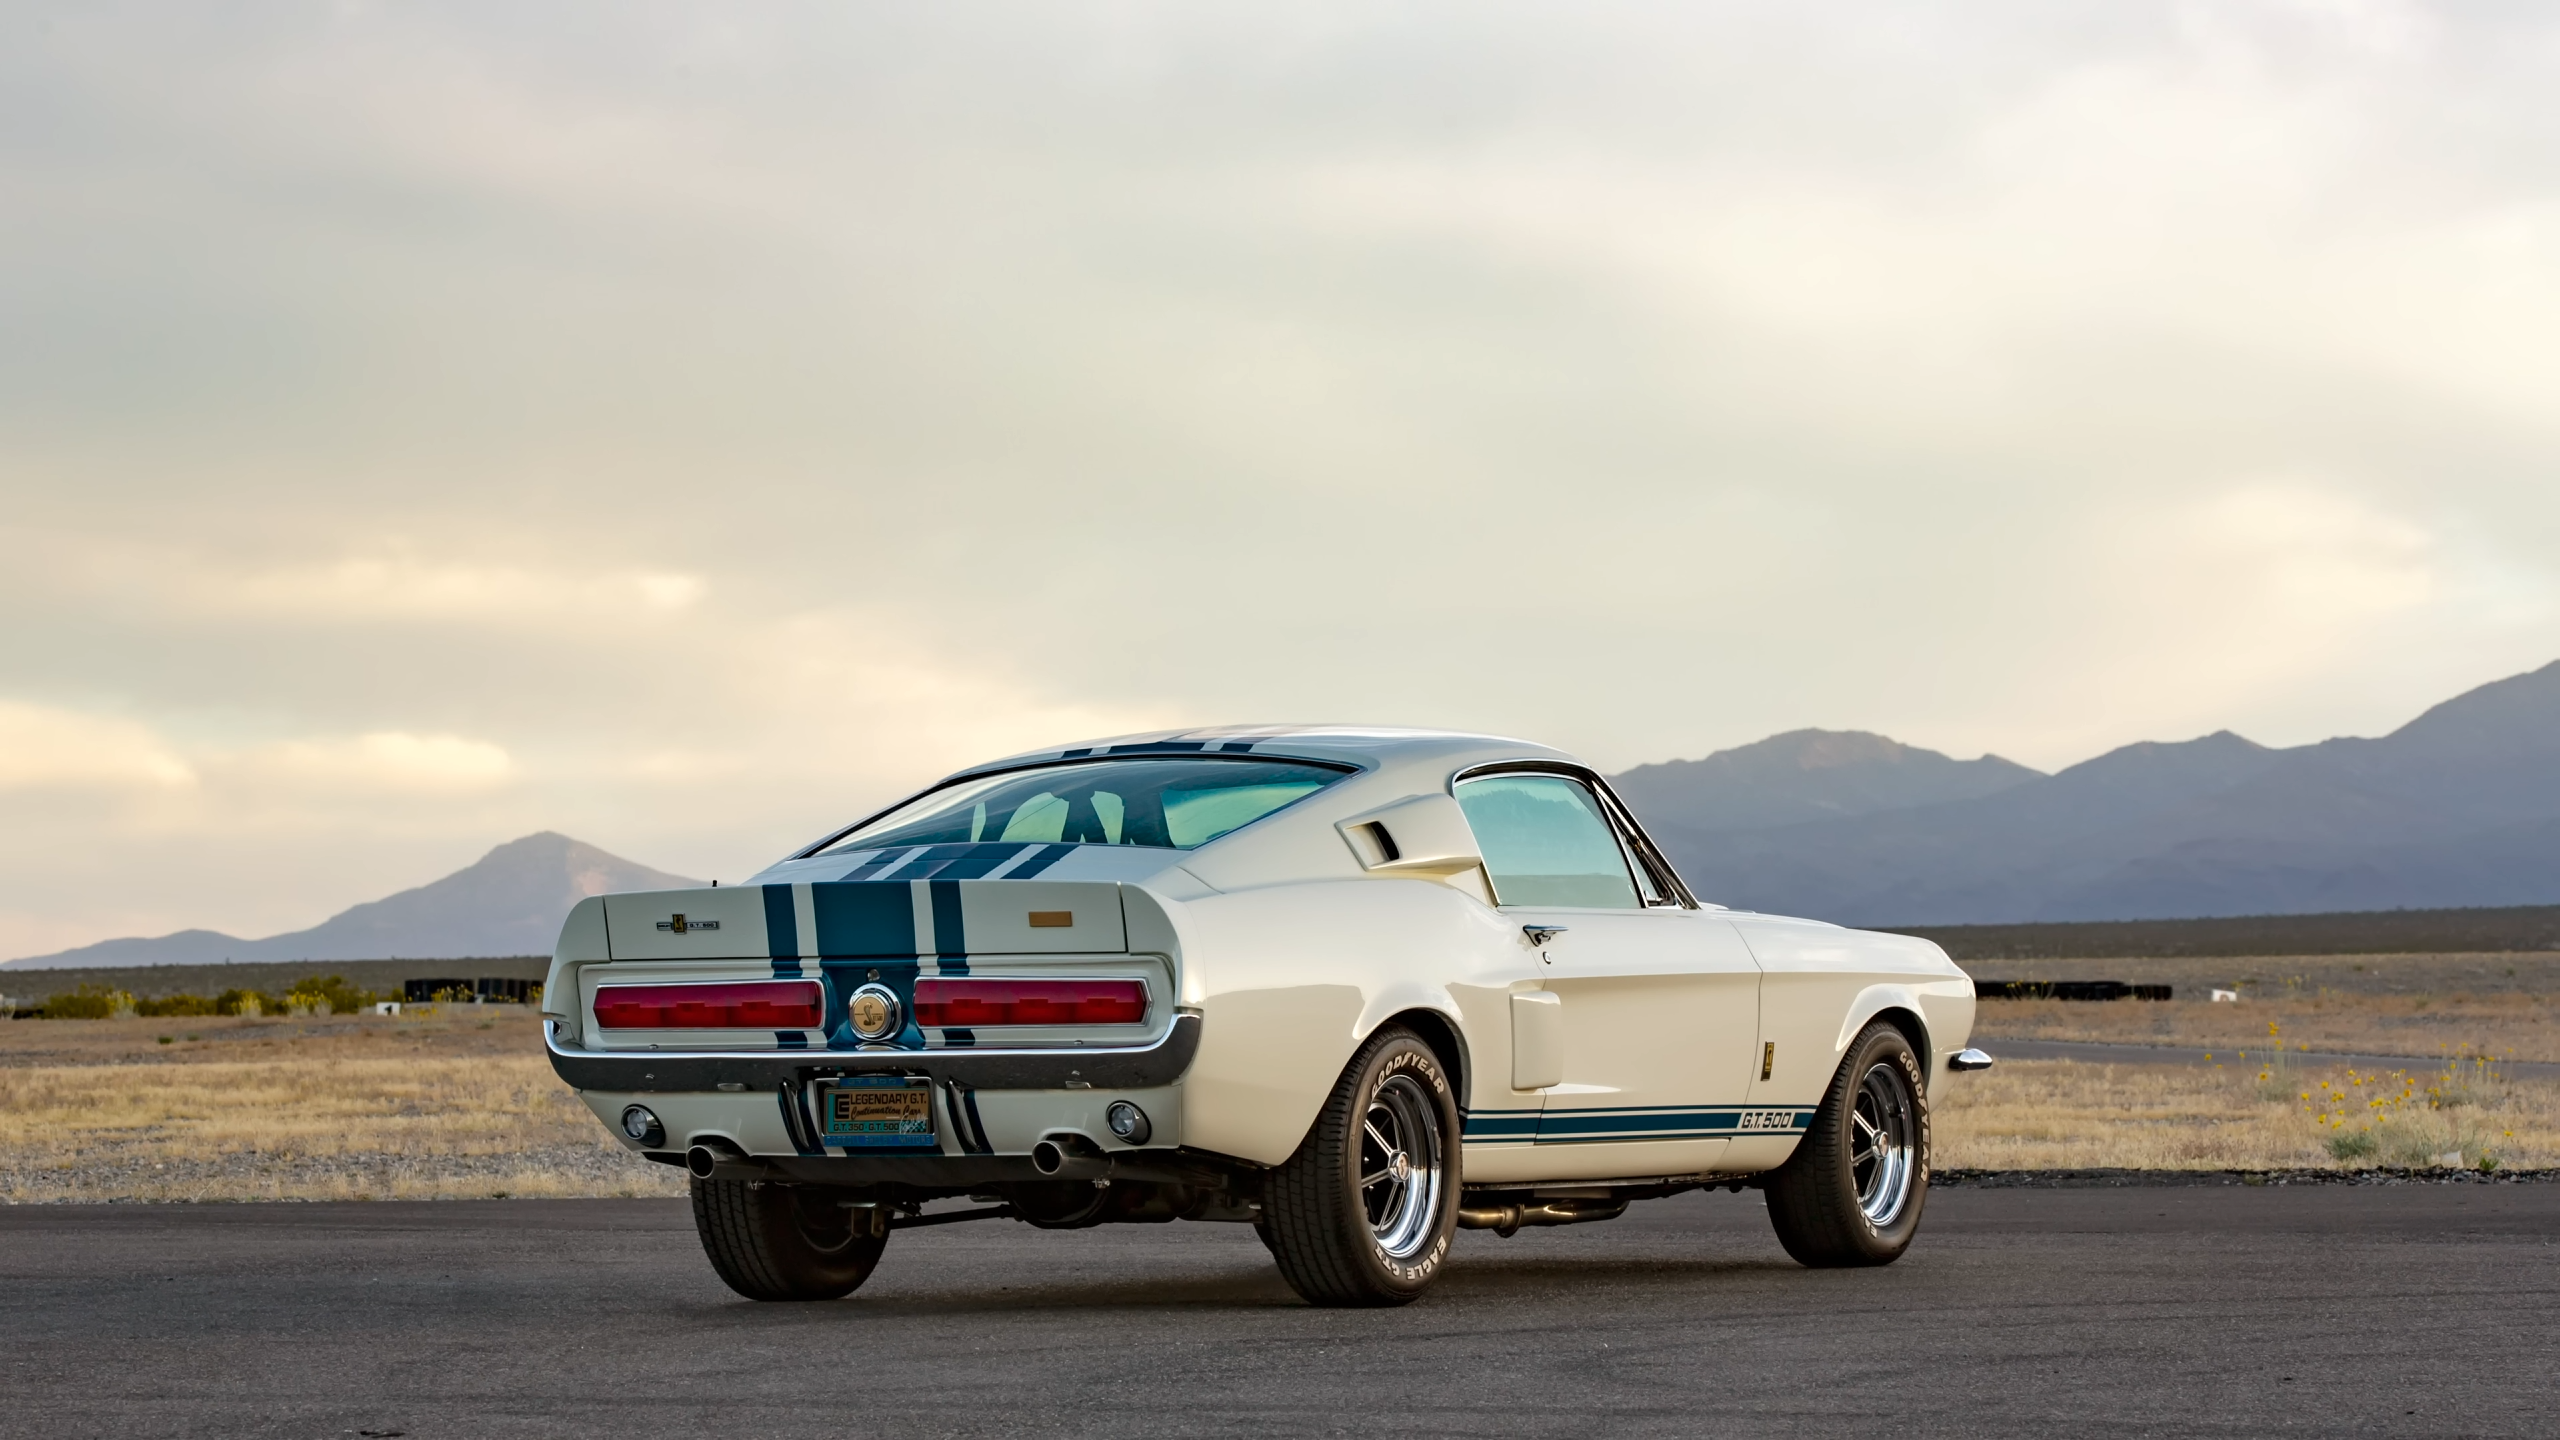 General 2560x1440 car muscle cars Ford Mustang Shelby rear view taillights sky clouds vehicle mountains sunlight